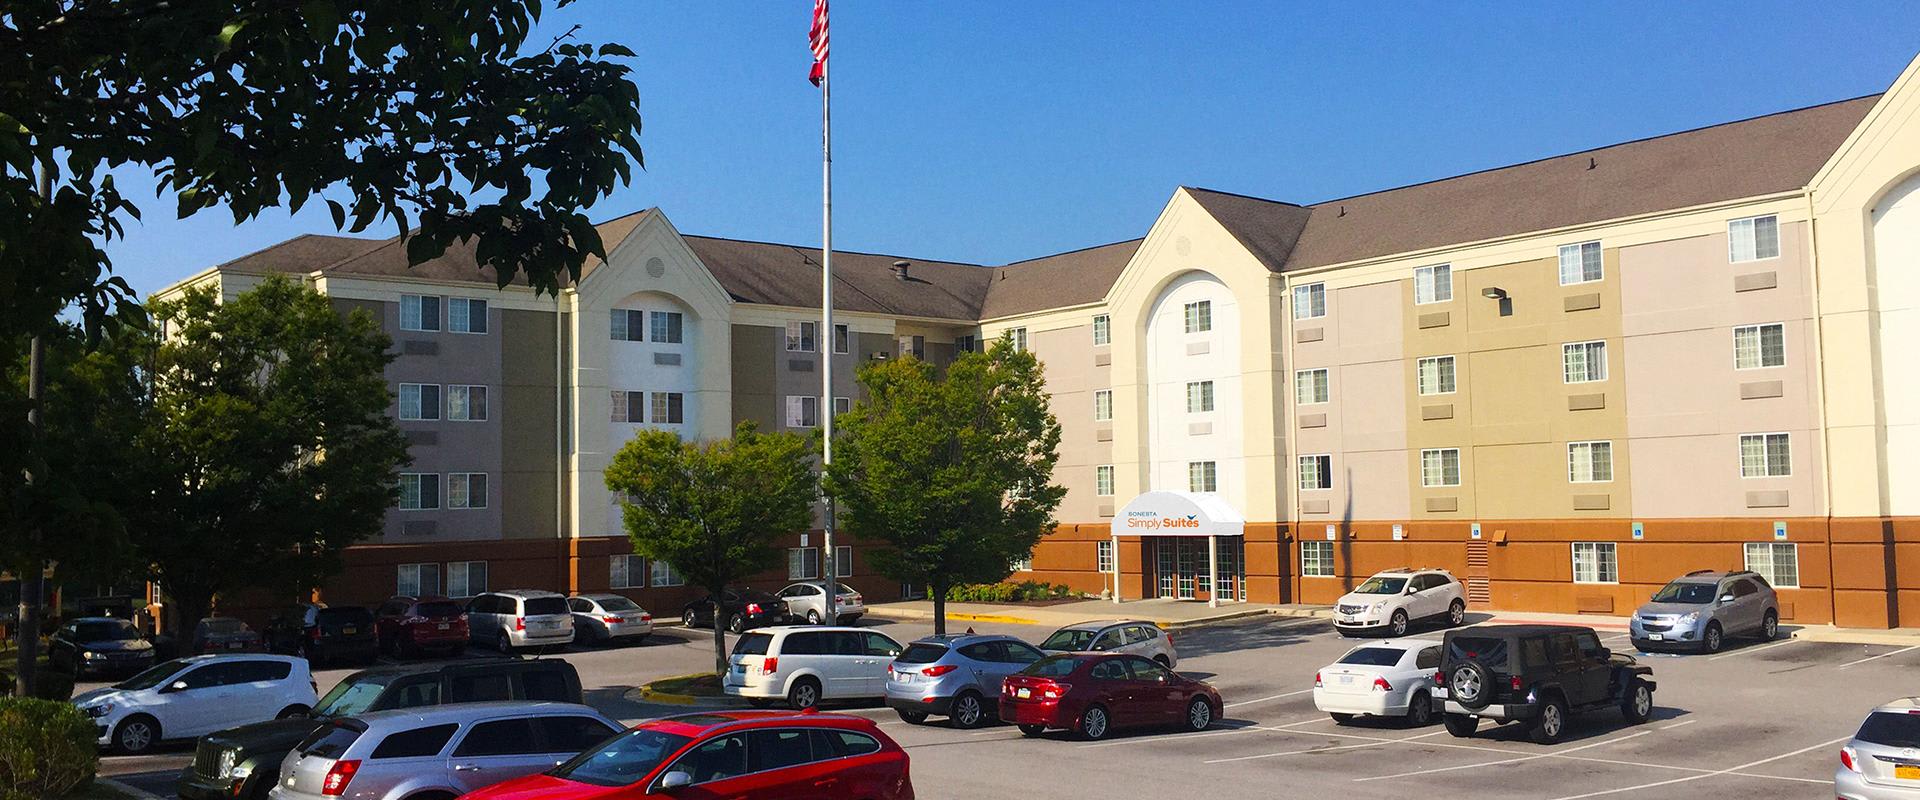 Sonesta Simply Suites Baltimore BWI Airport Hotel Exterior Entrance and parking lot